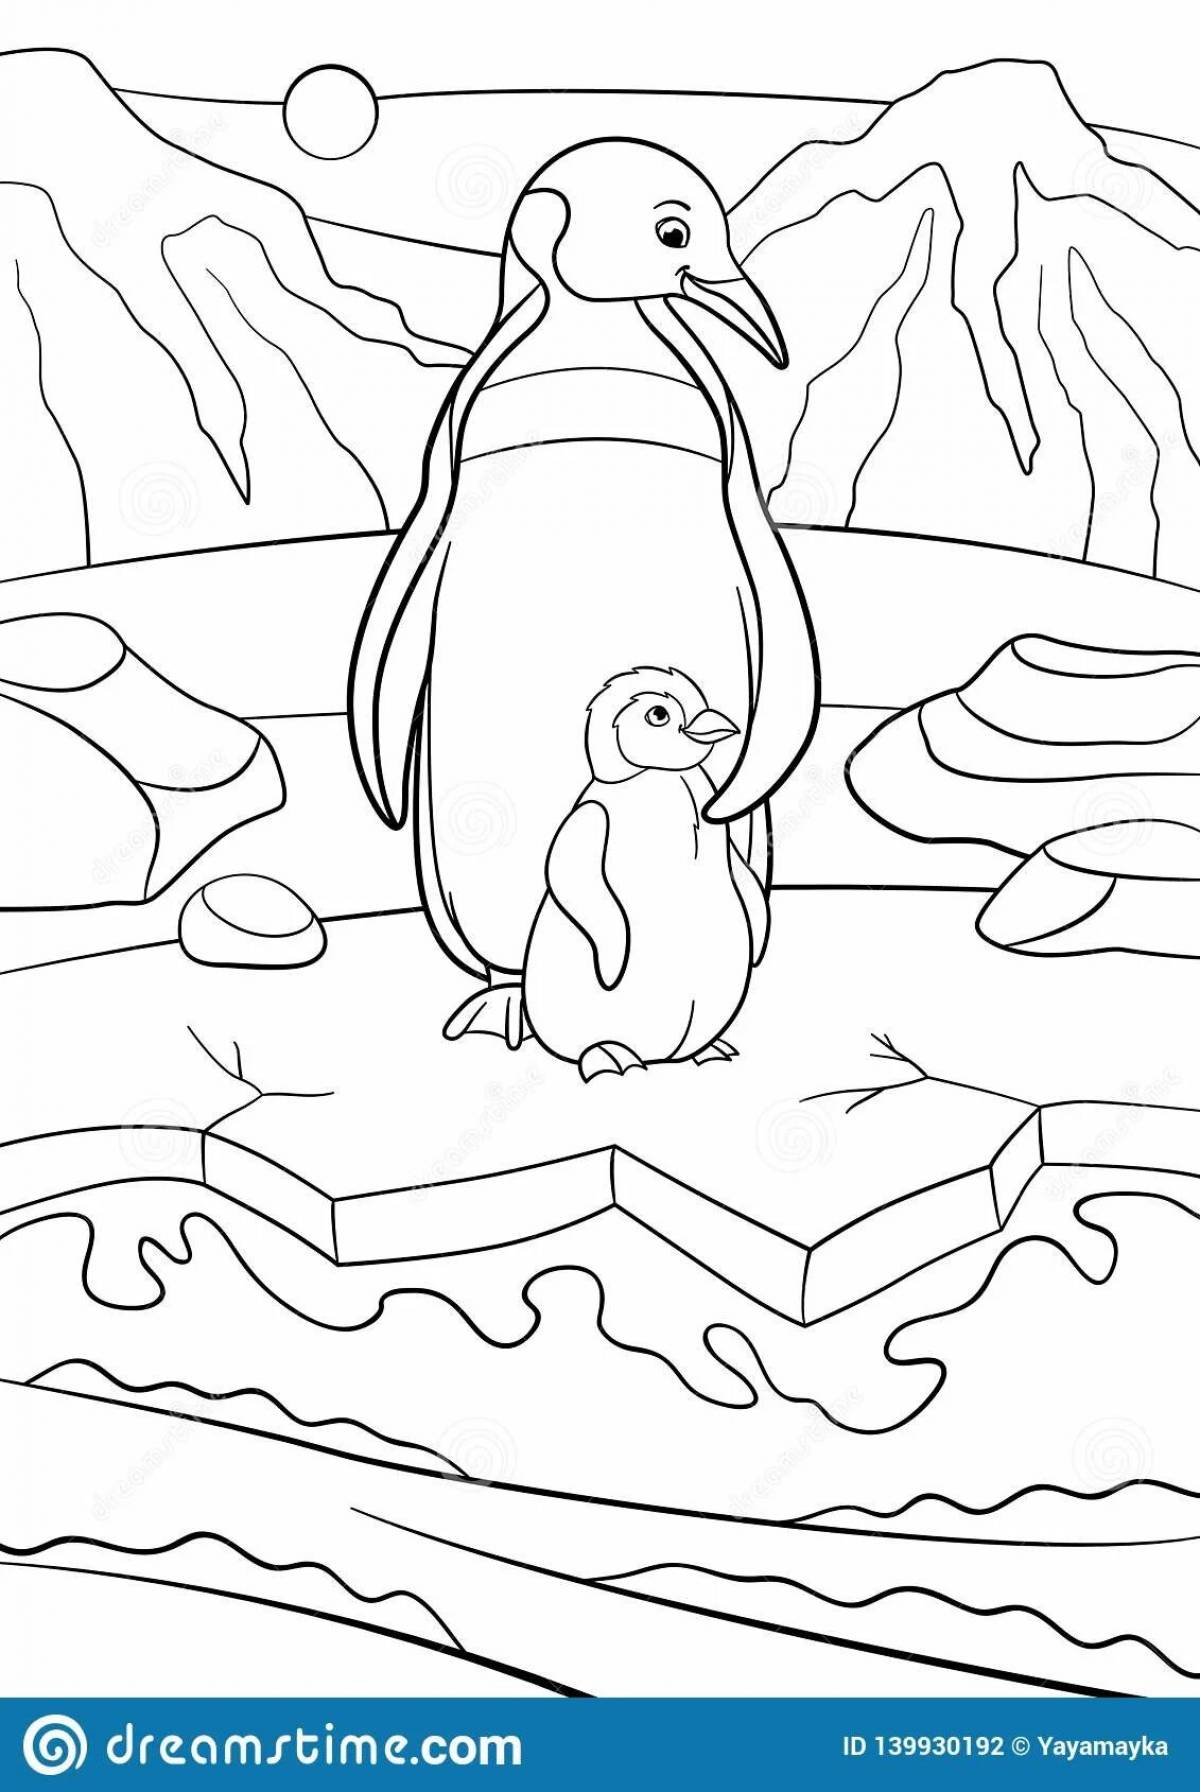 Coloring book magic penguin on an ice floe for children